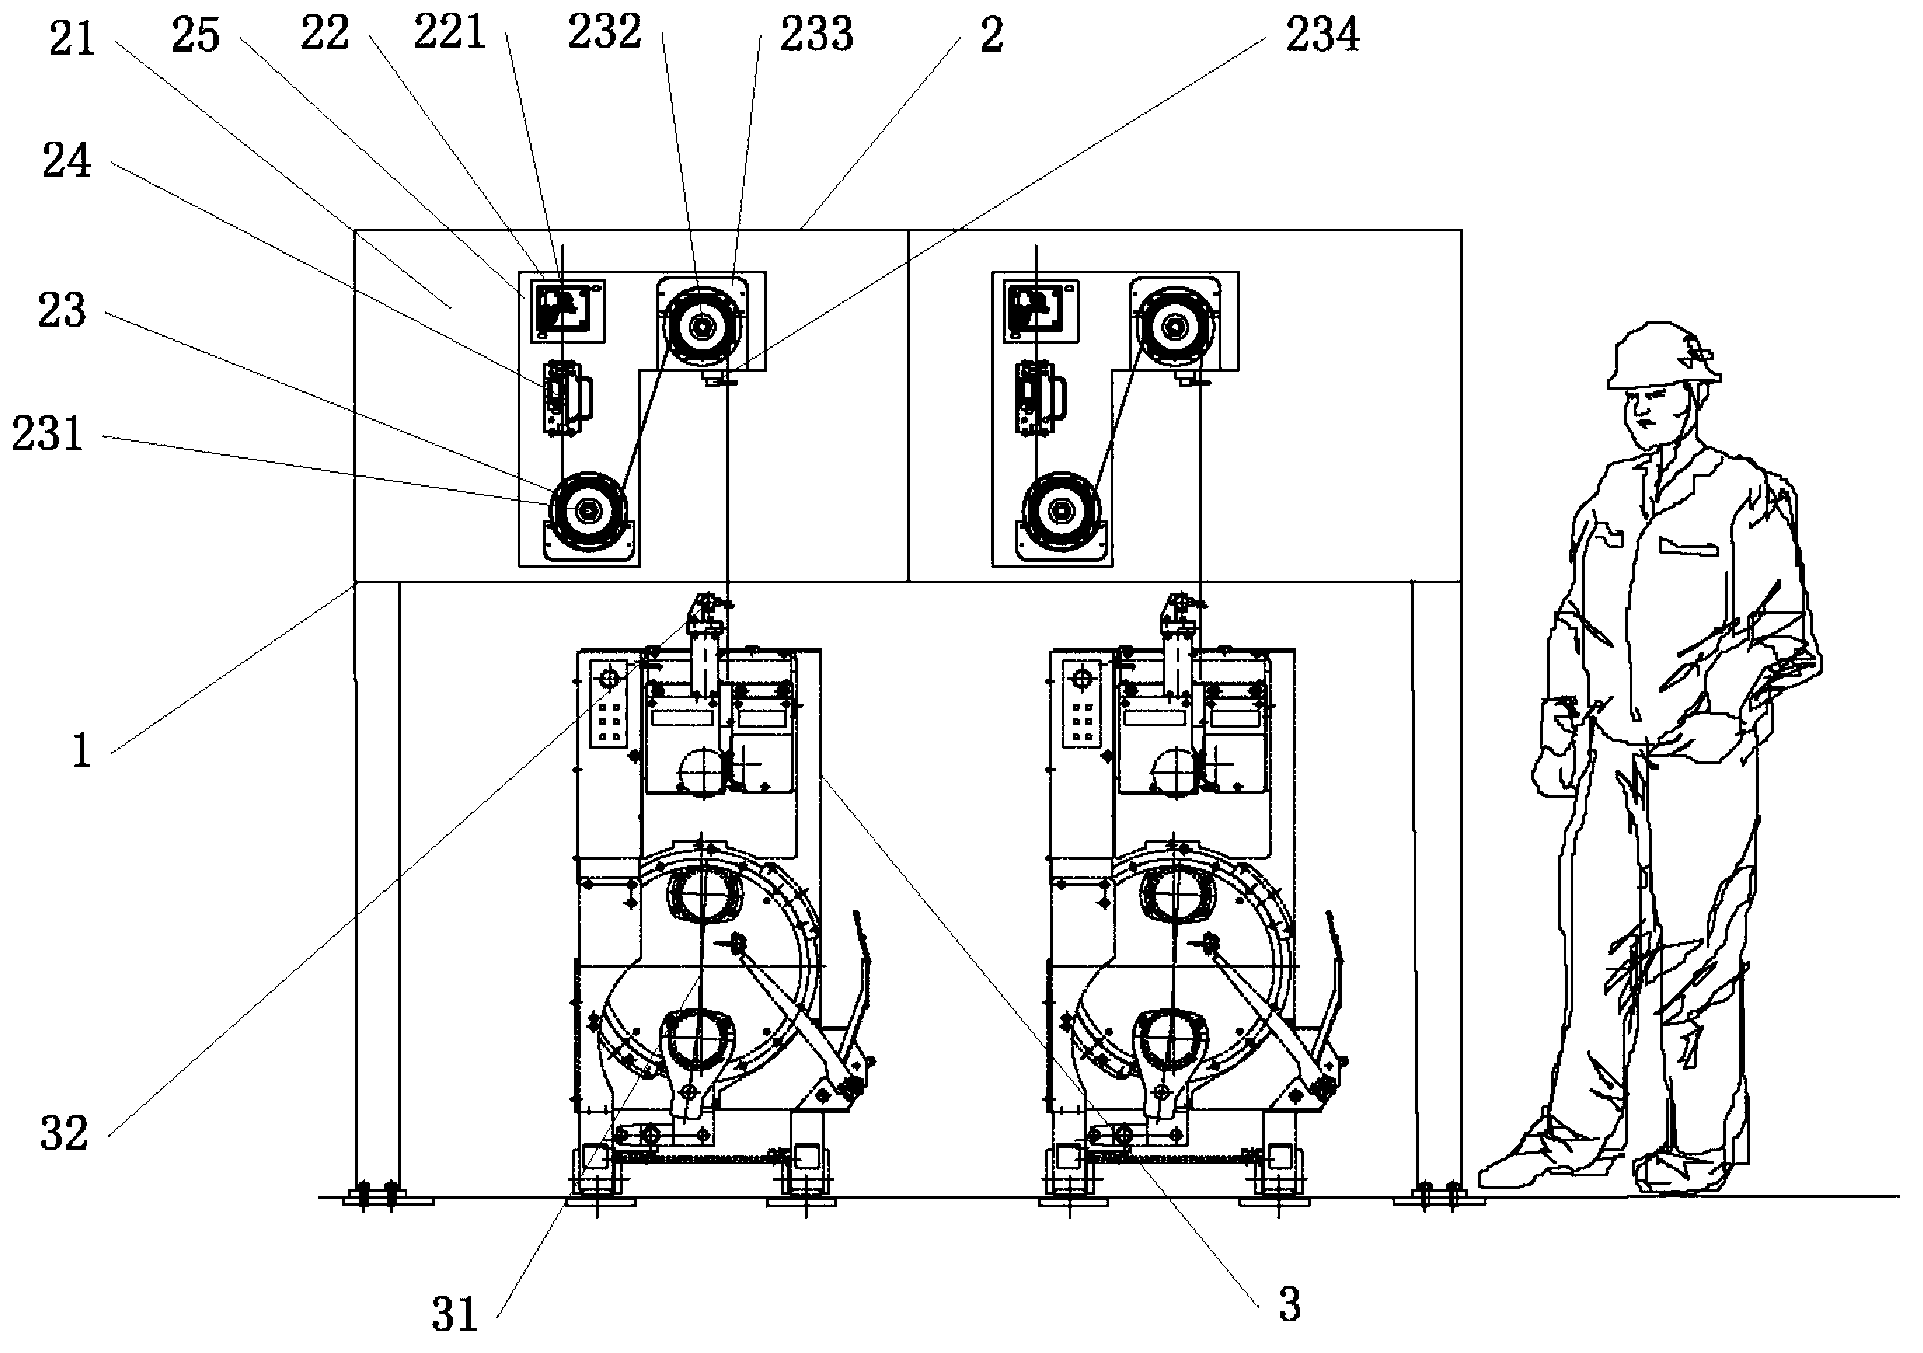 Filament drawing and winding device